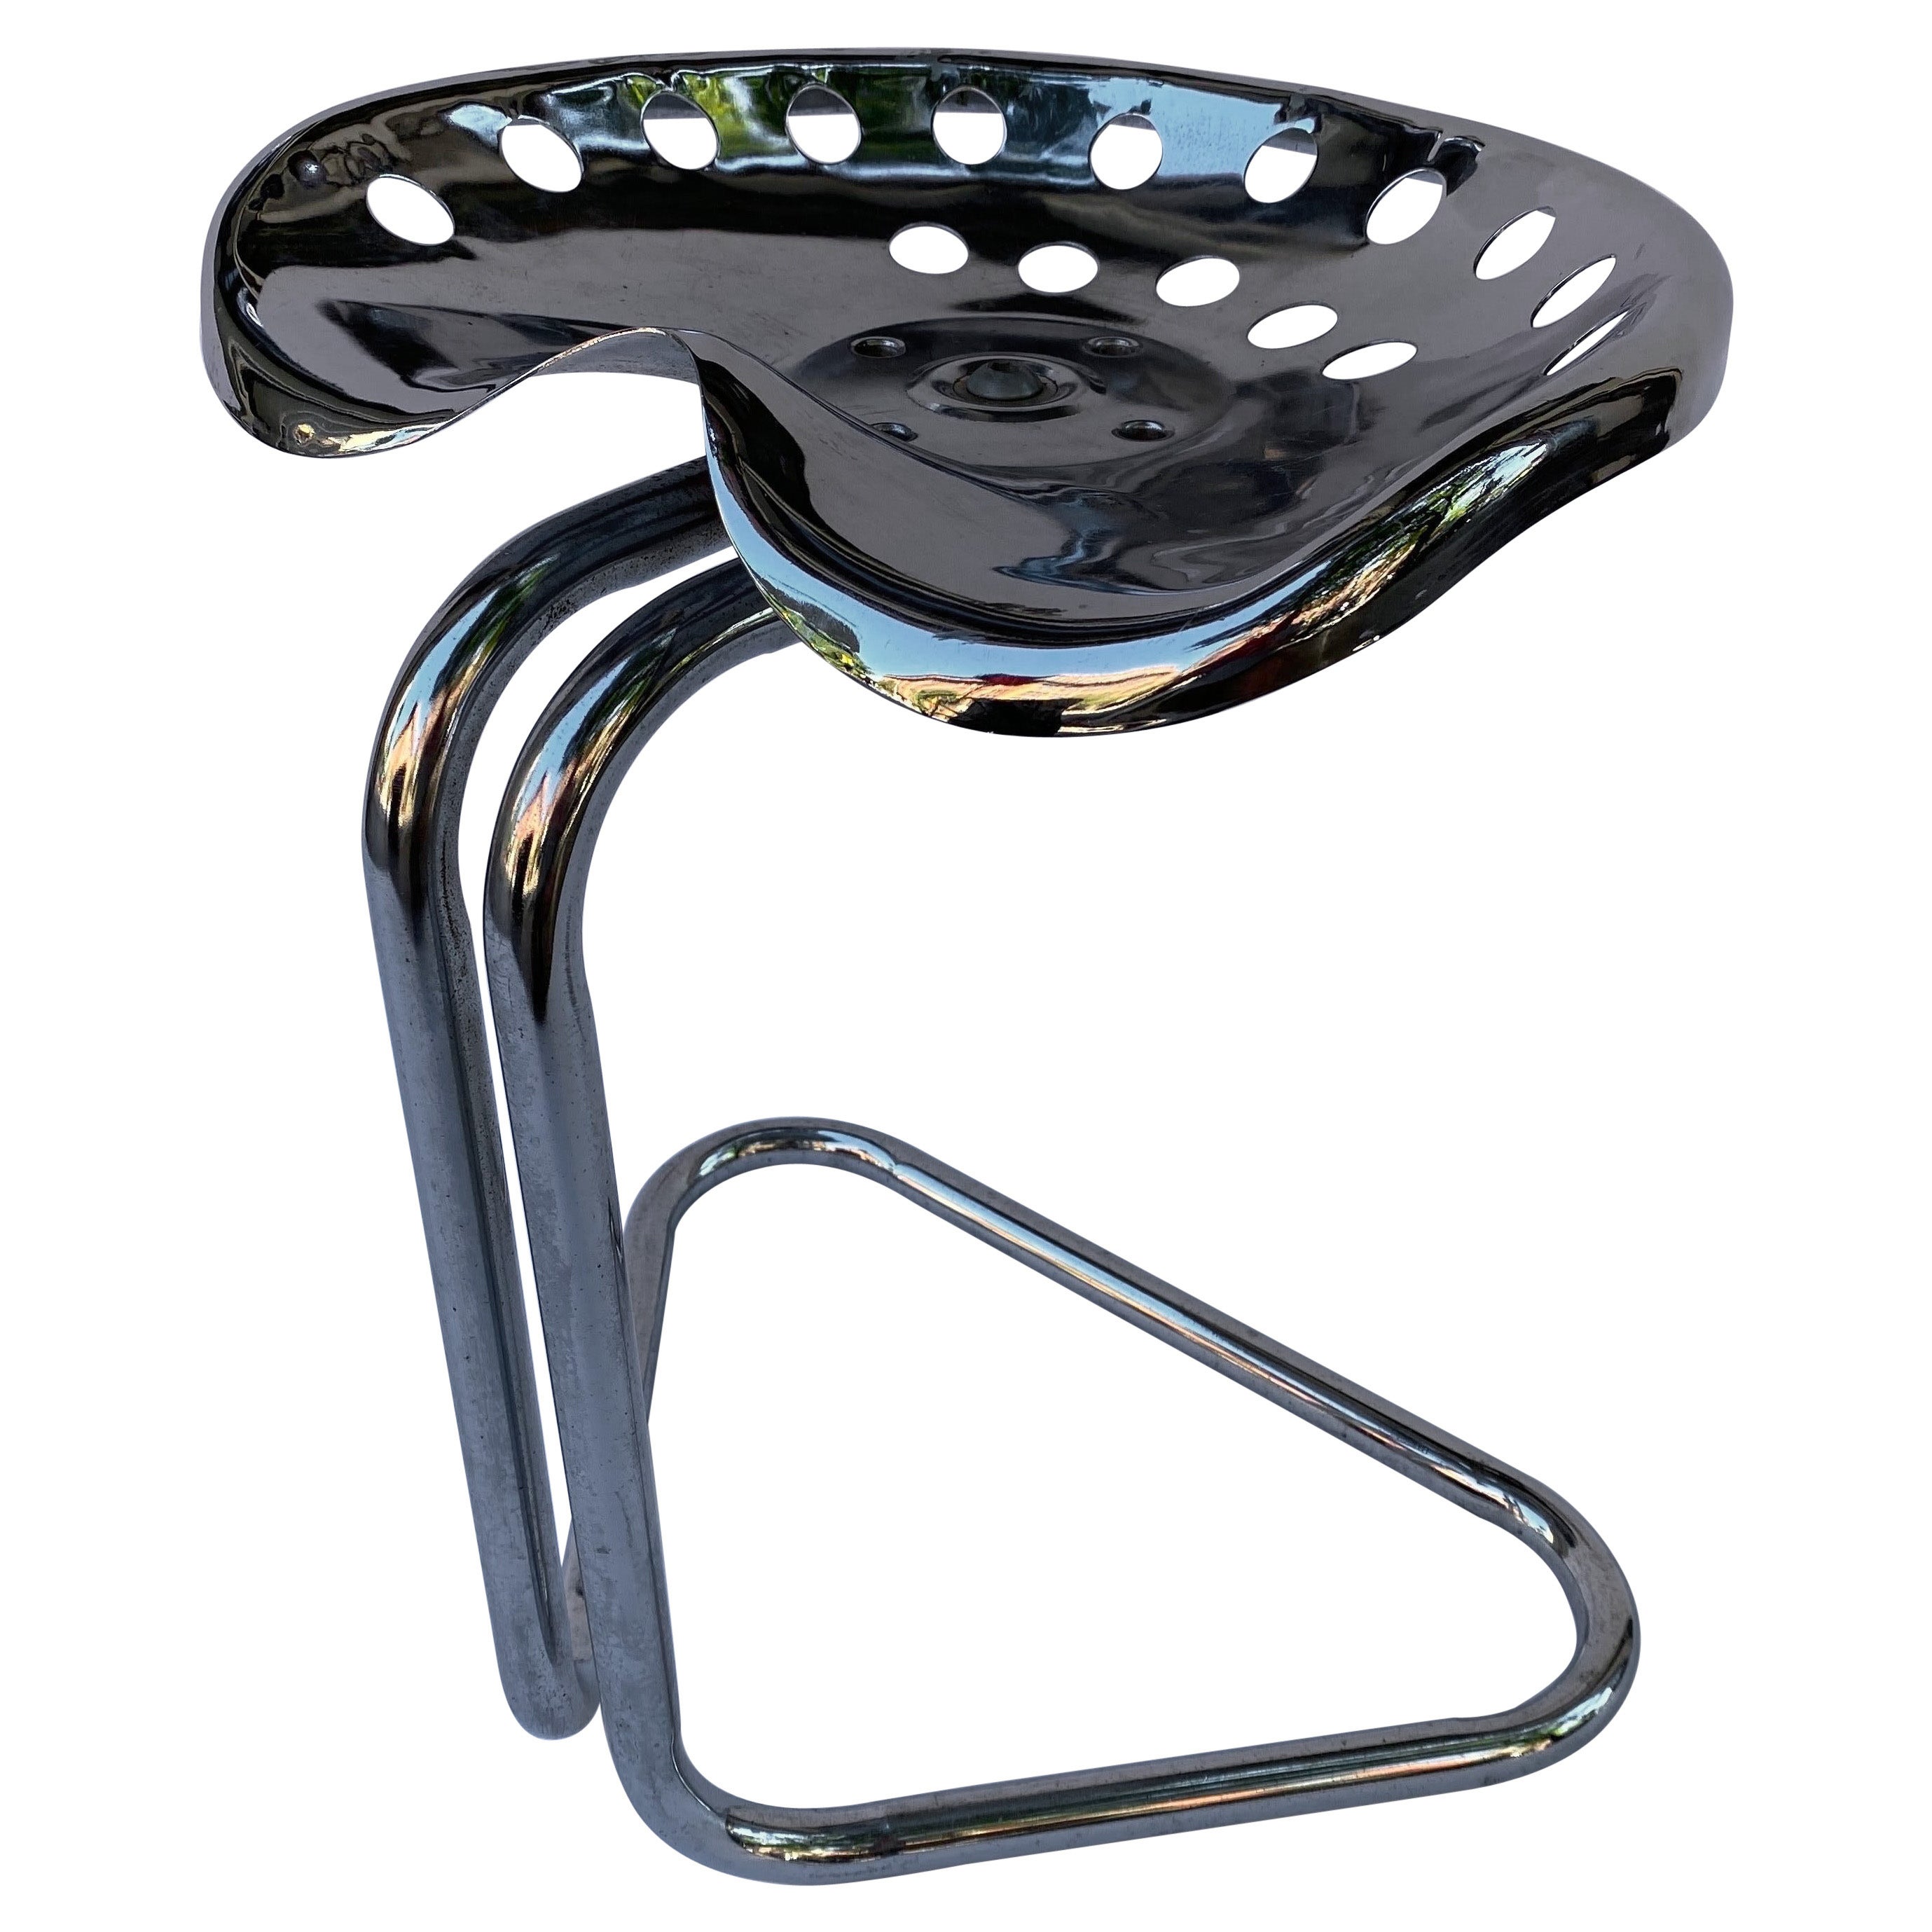 Chrome Tractor Seat Stool For Sale